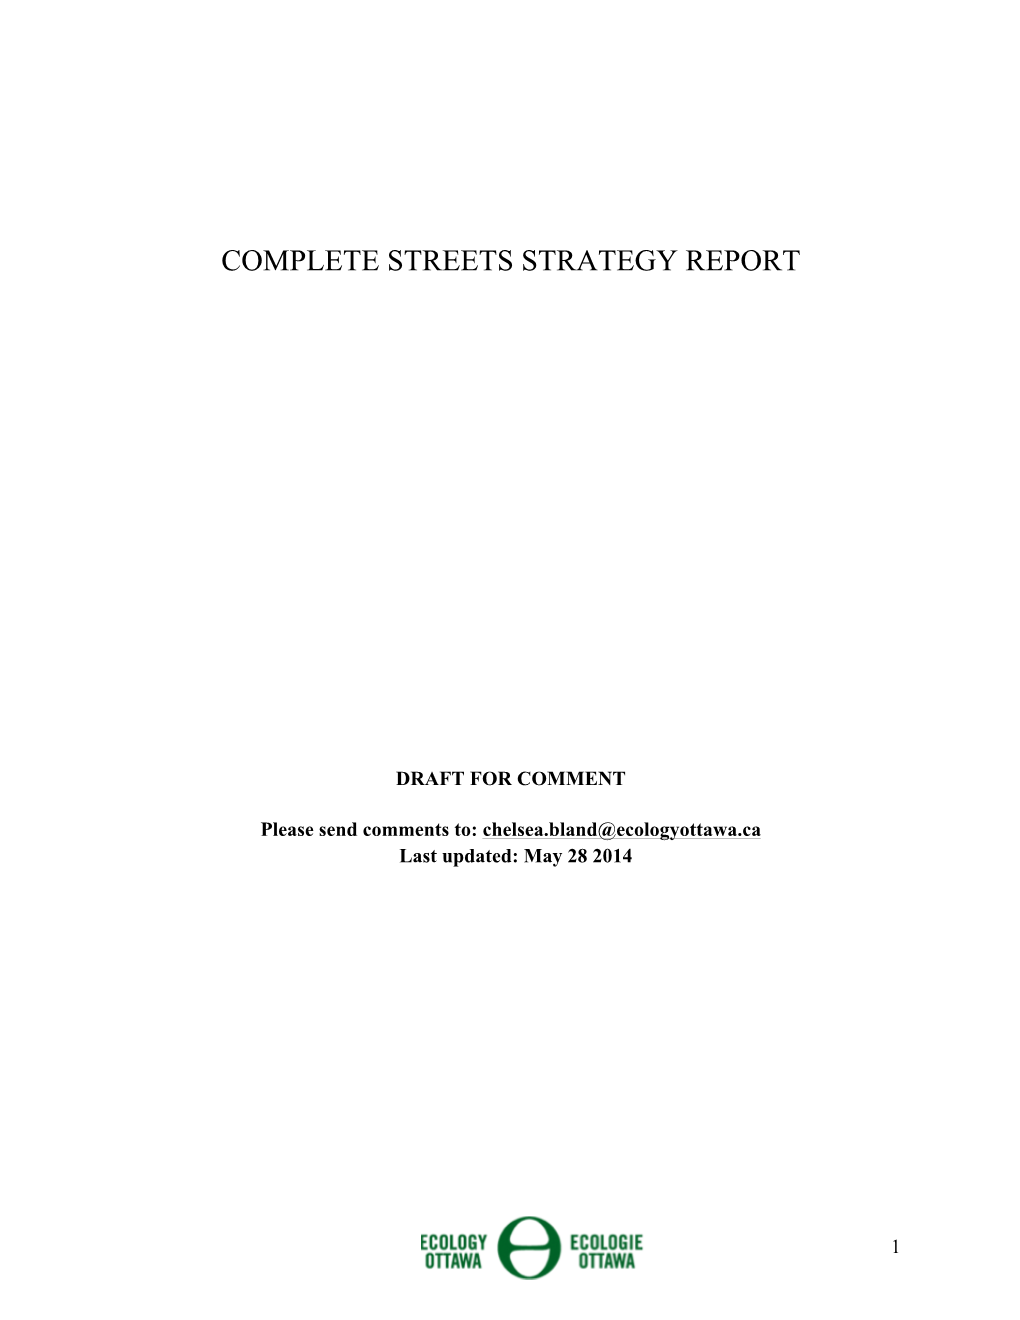 Complete Streets Strategy Report